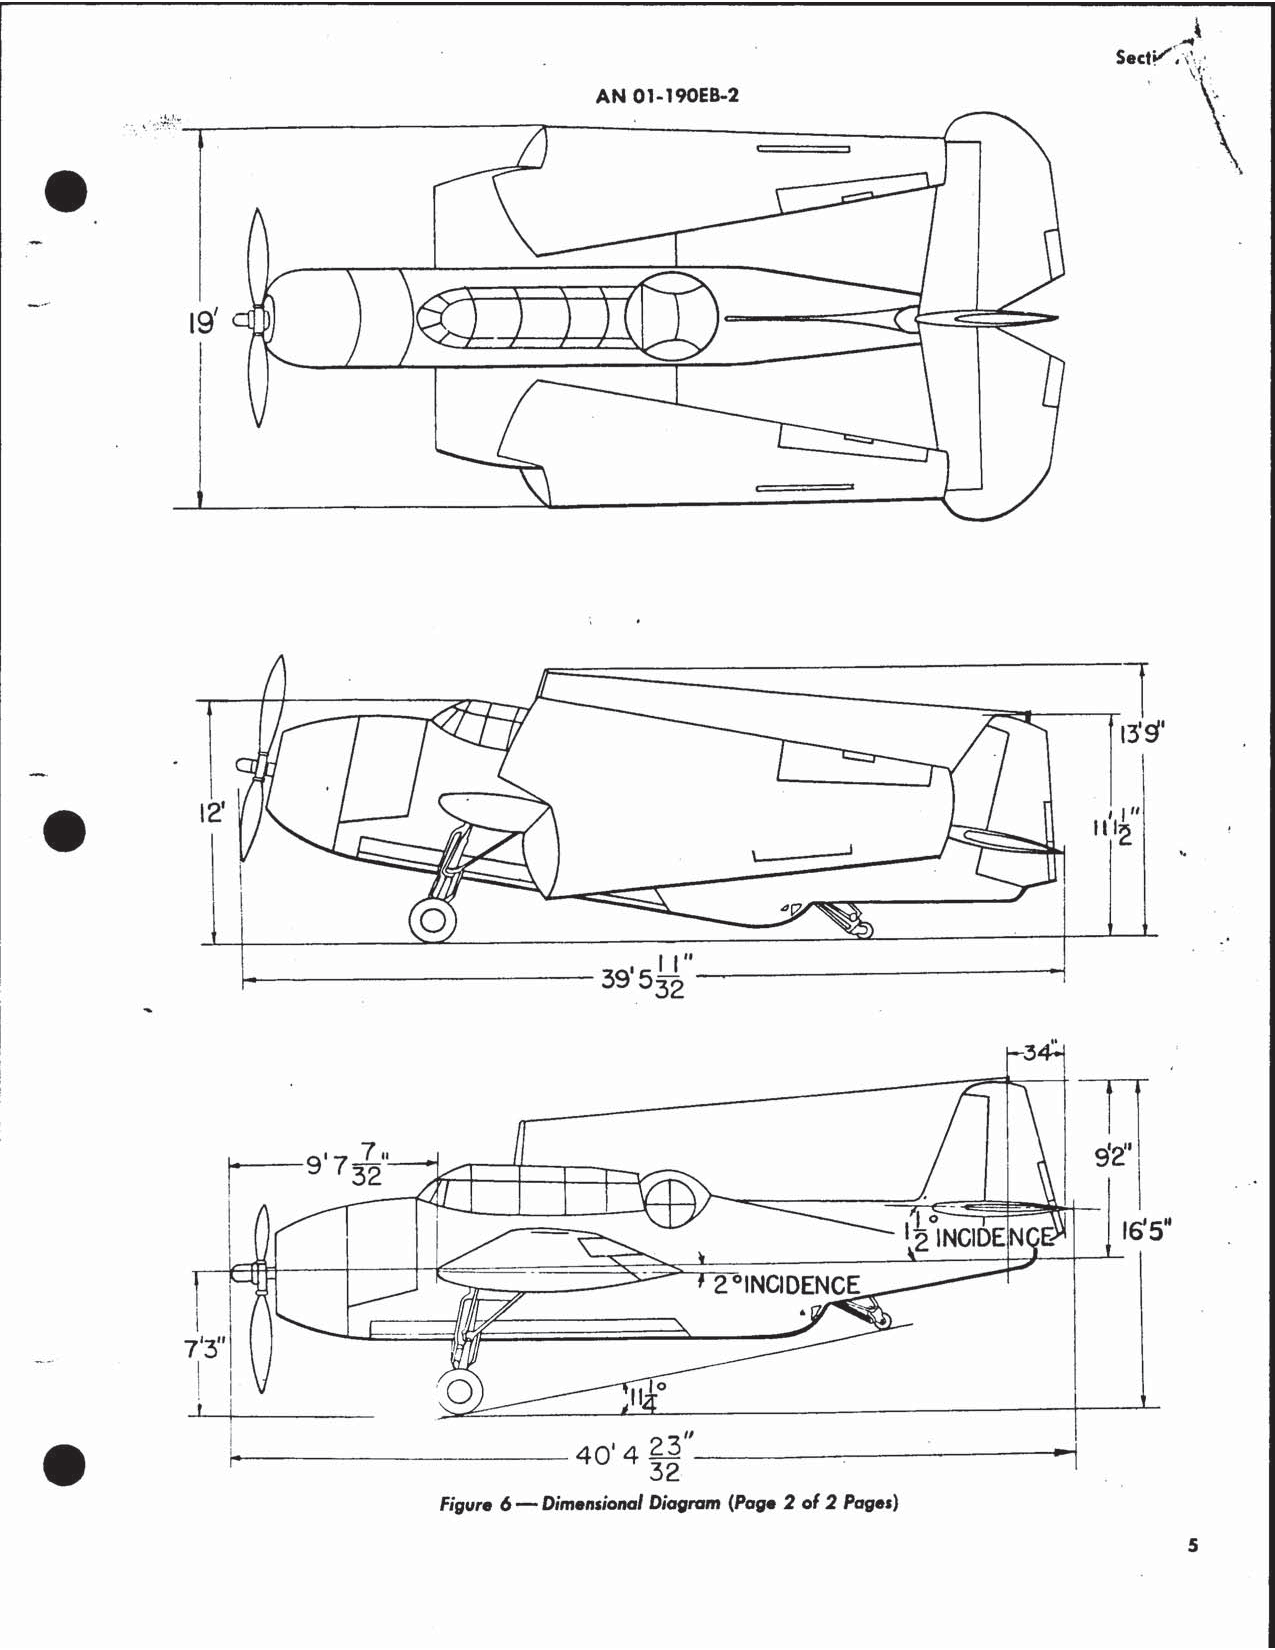 Sample page 15 from AirCorps Library document: Erection and Maintenance Handbook TBM-3